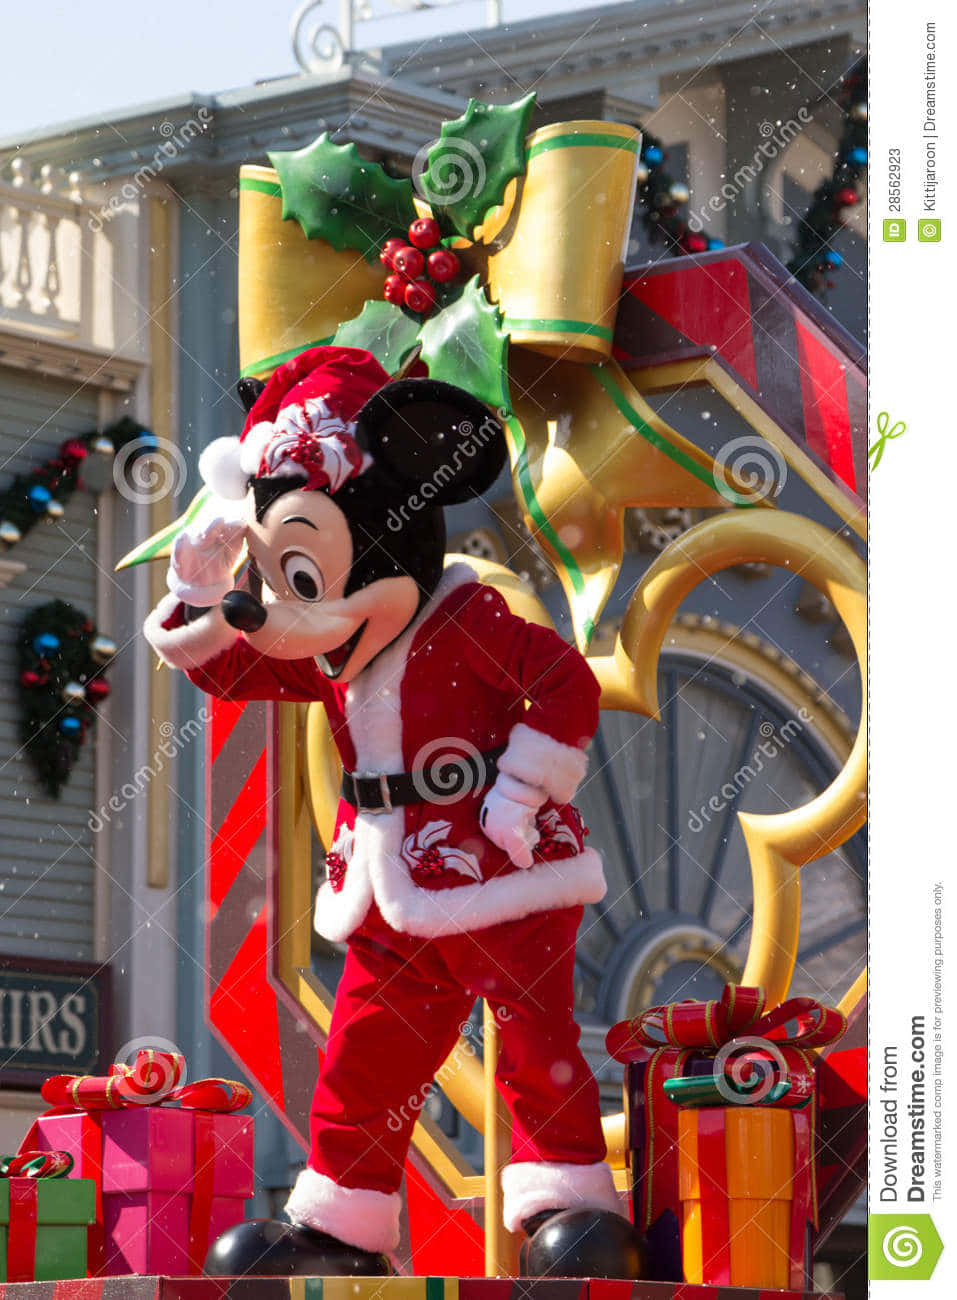 Happy New Year with Mickey Mouse! Wallpaper